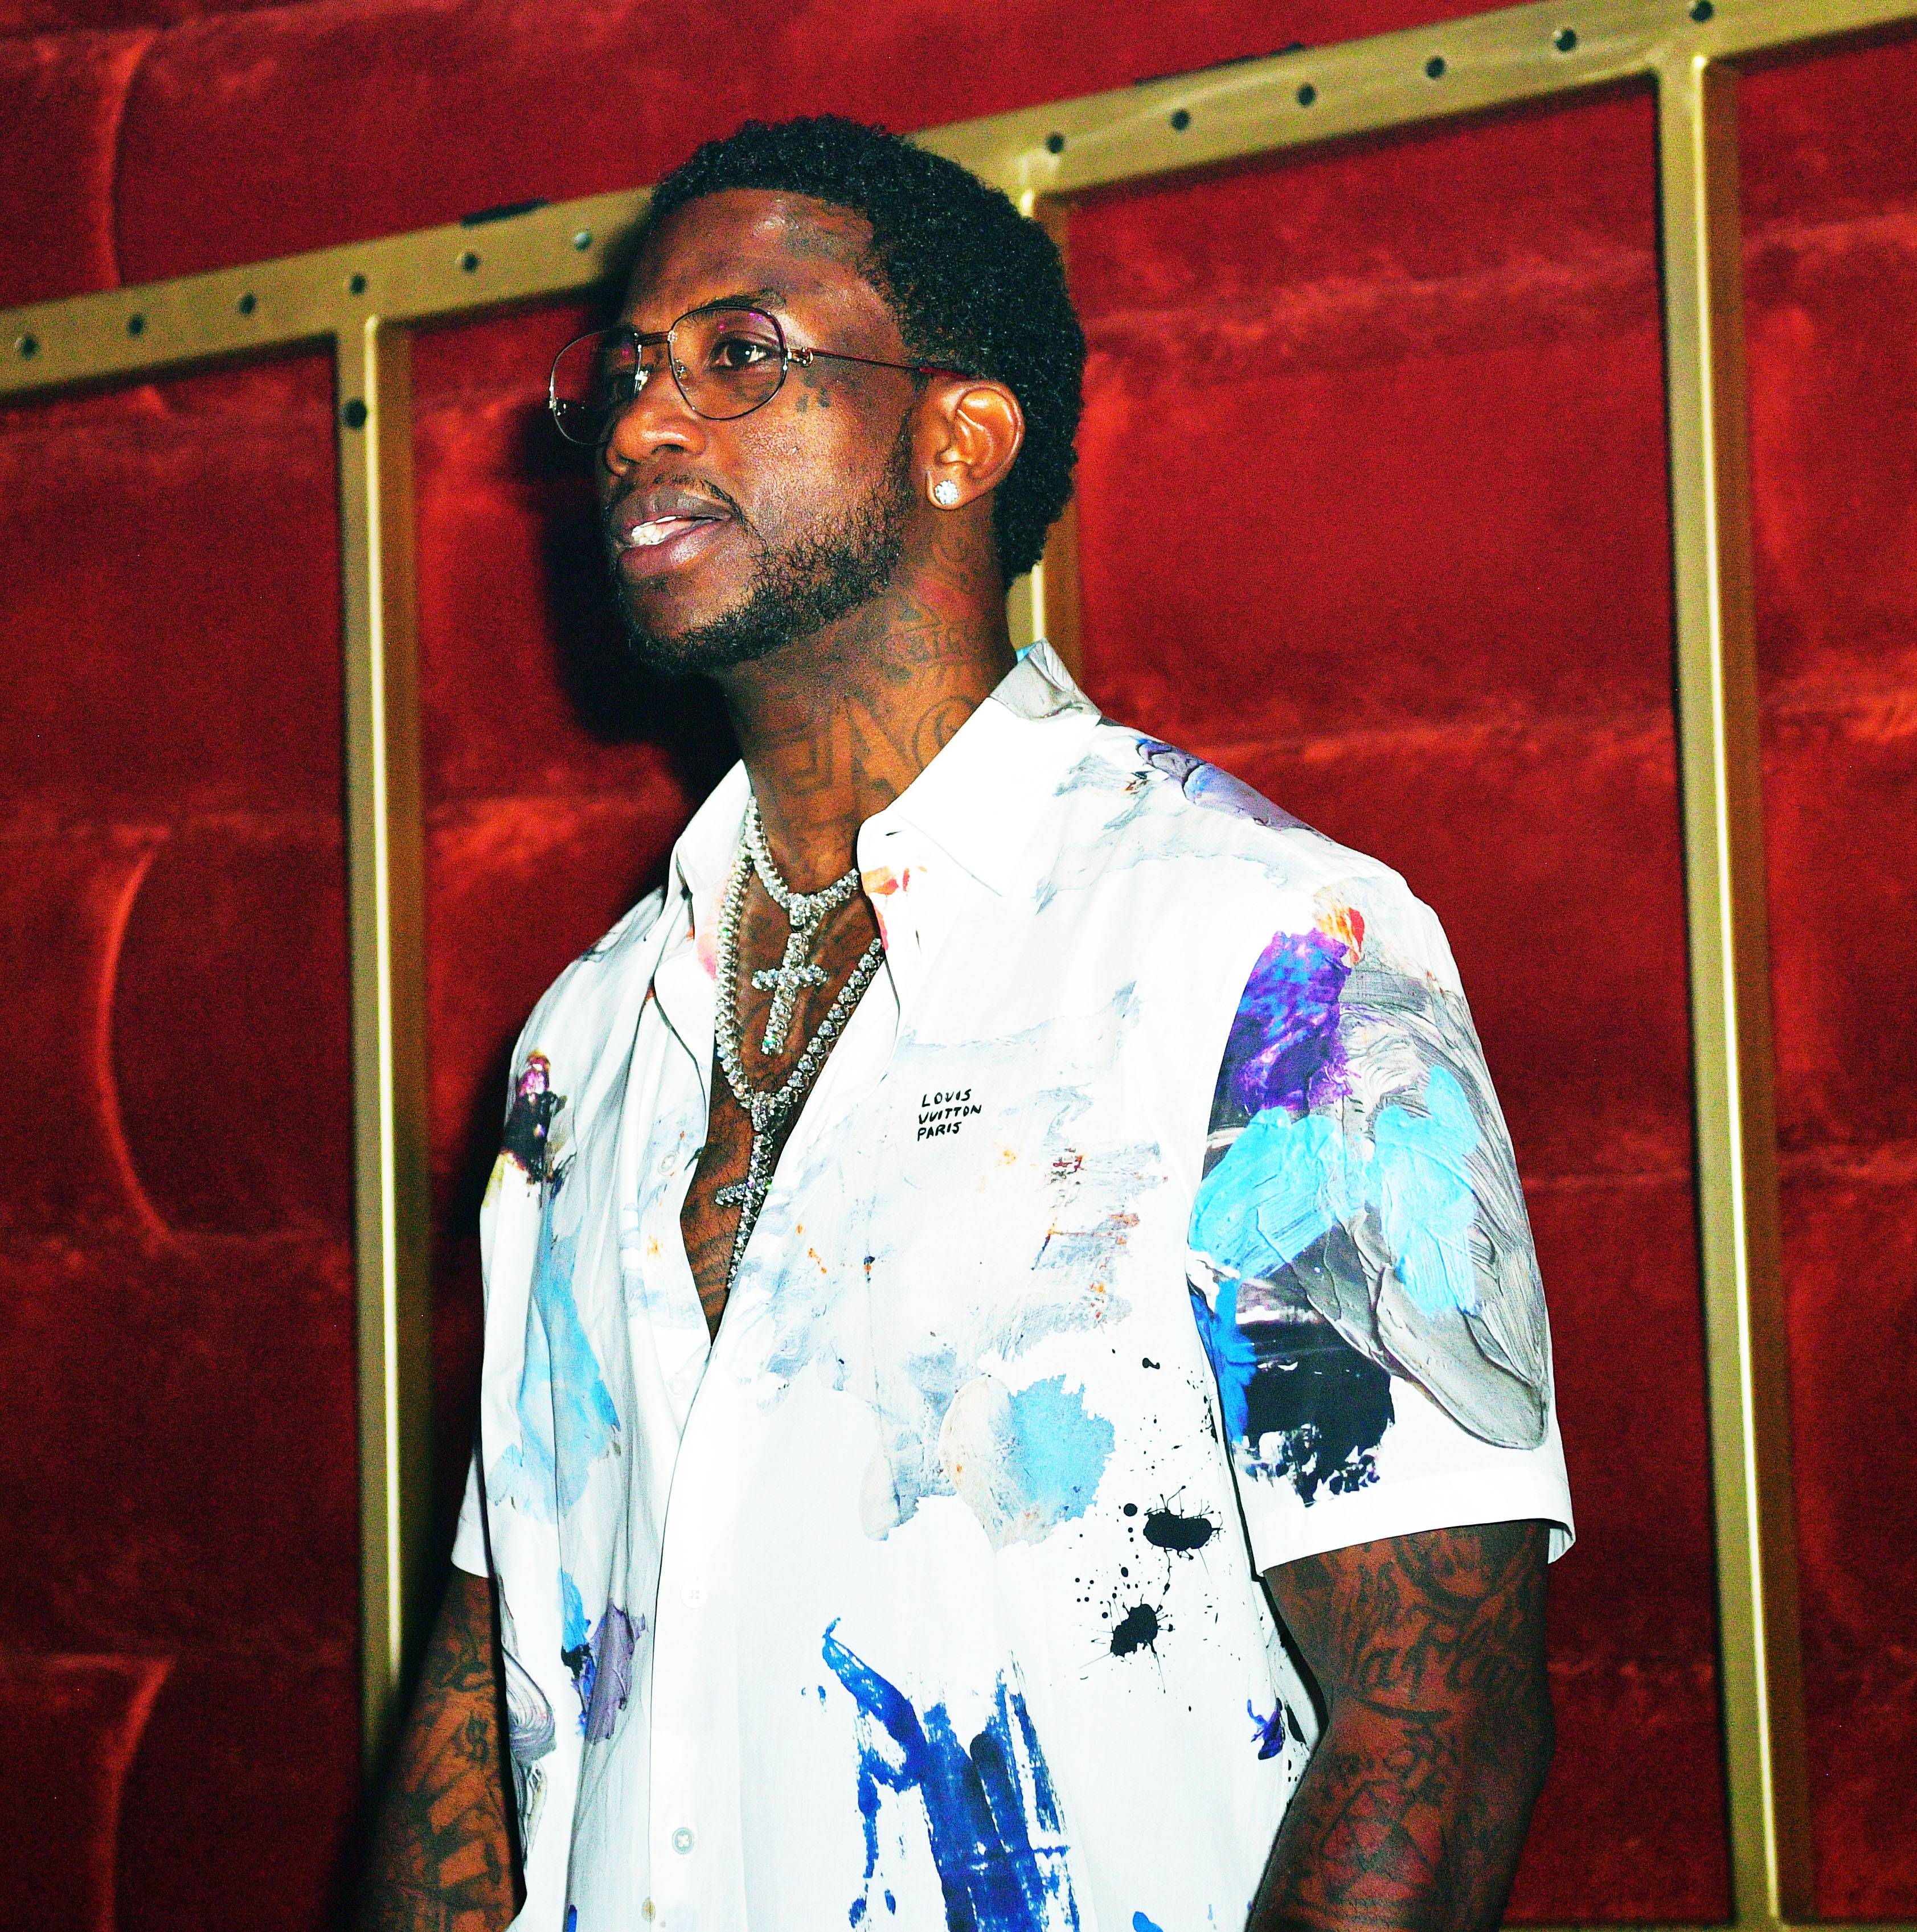 Gucci Mane Outfit from October 2, 2021